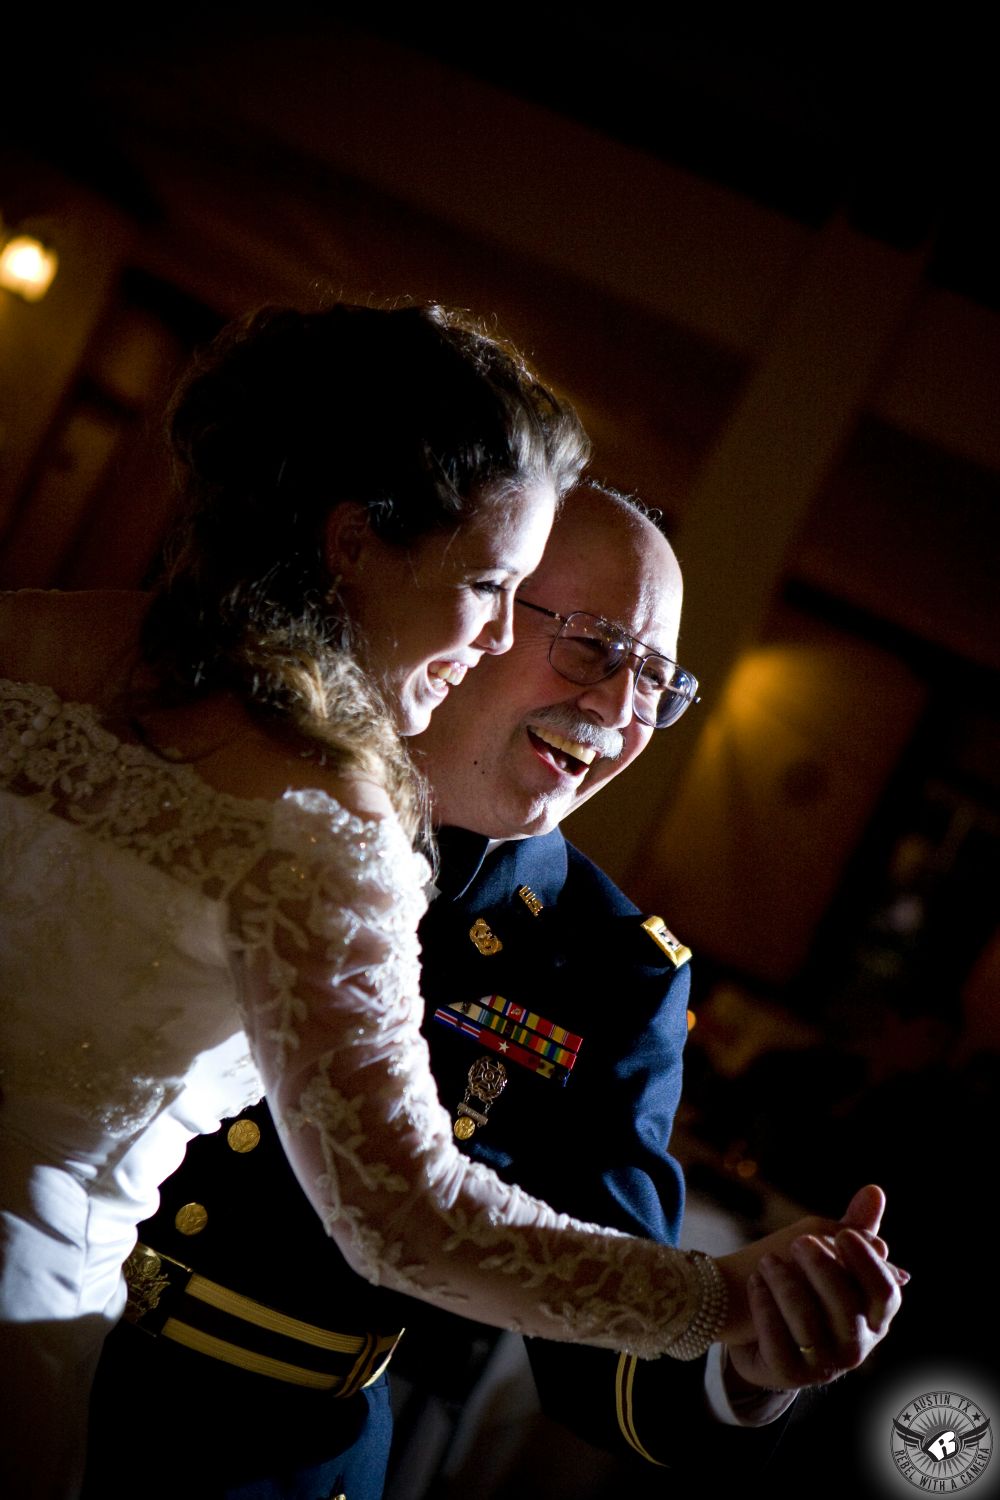 Bride in lace sleeved wedding dress and her father in military dress blues dance together at wedding reception at Star Ranch Golf Club in Hutto Texas with dramatic lighting.